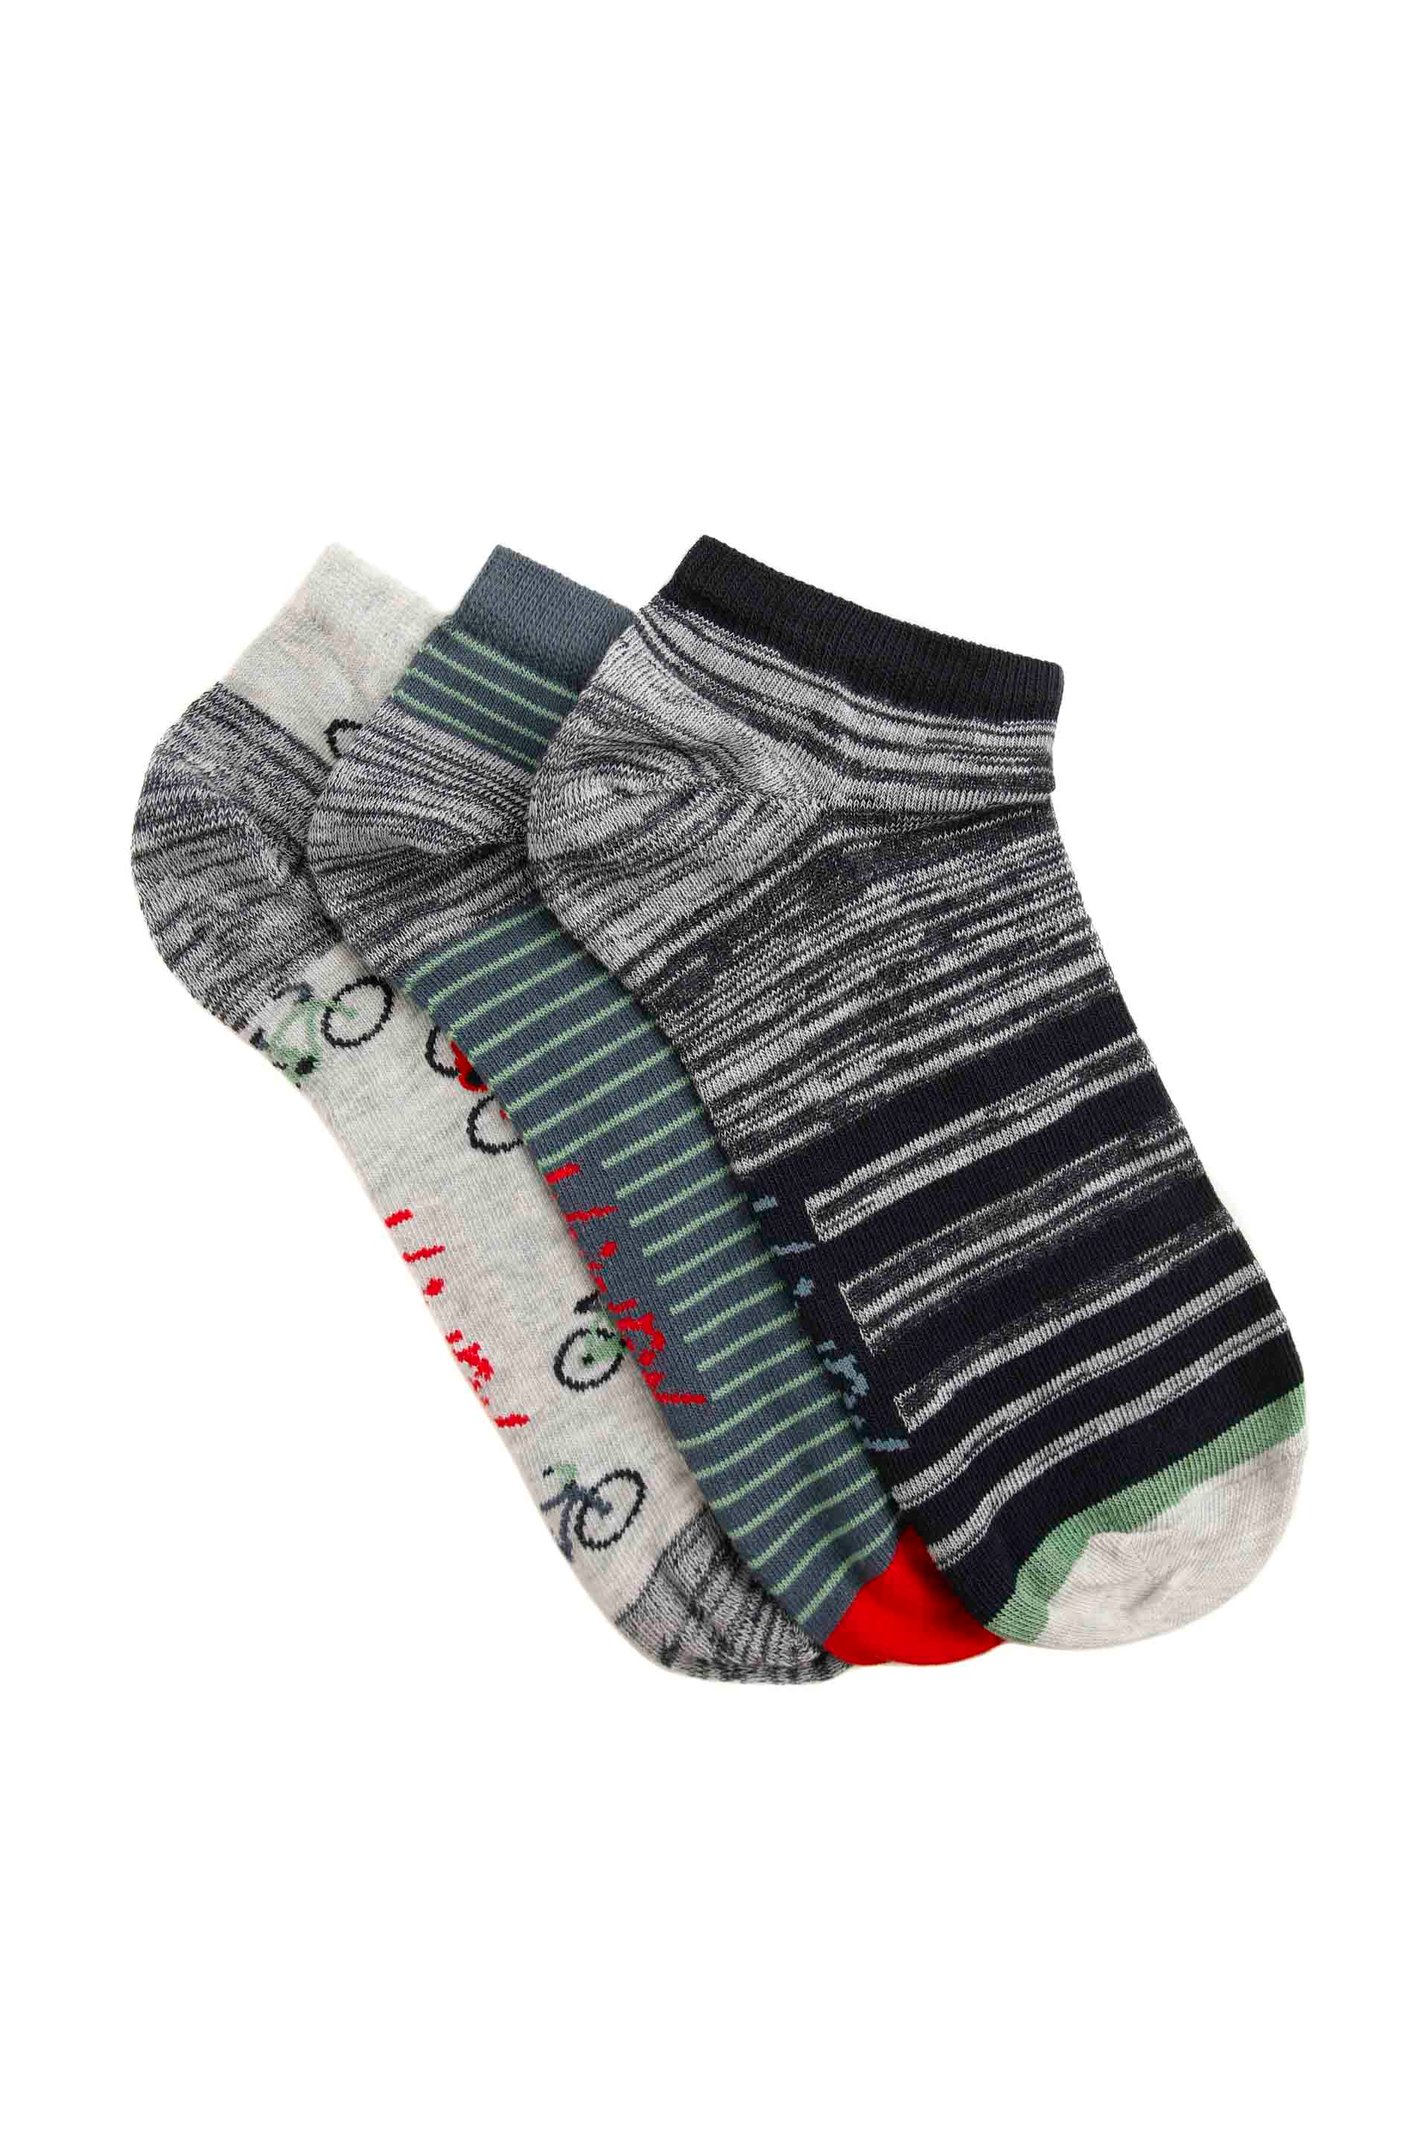 Weird Fish Rolph Trainer Socks 3 Pack Grey Marl Size 7-11